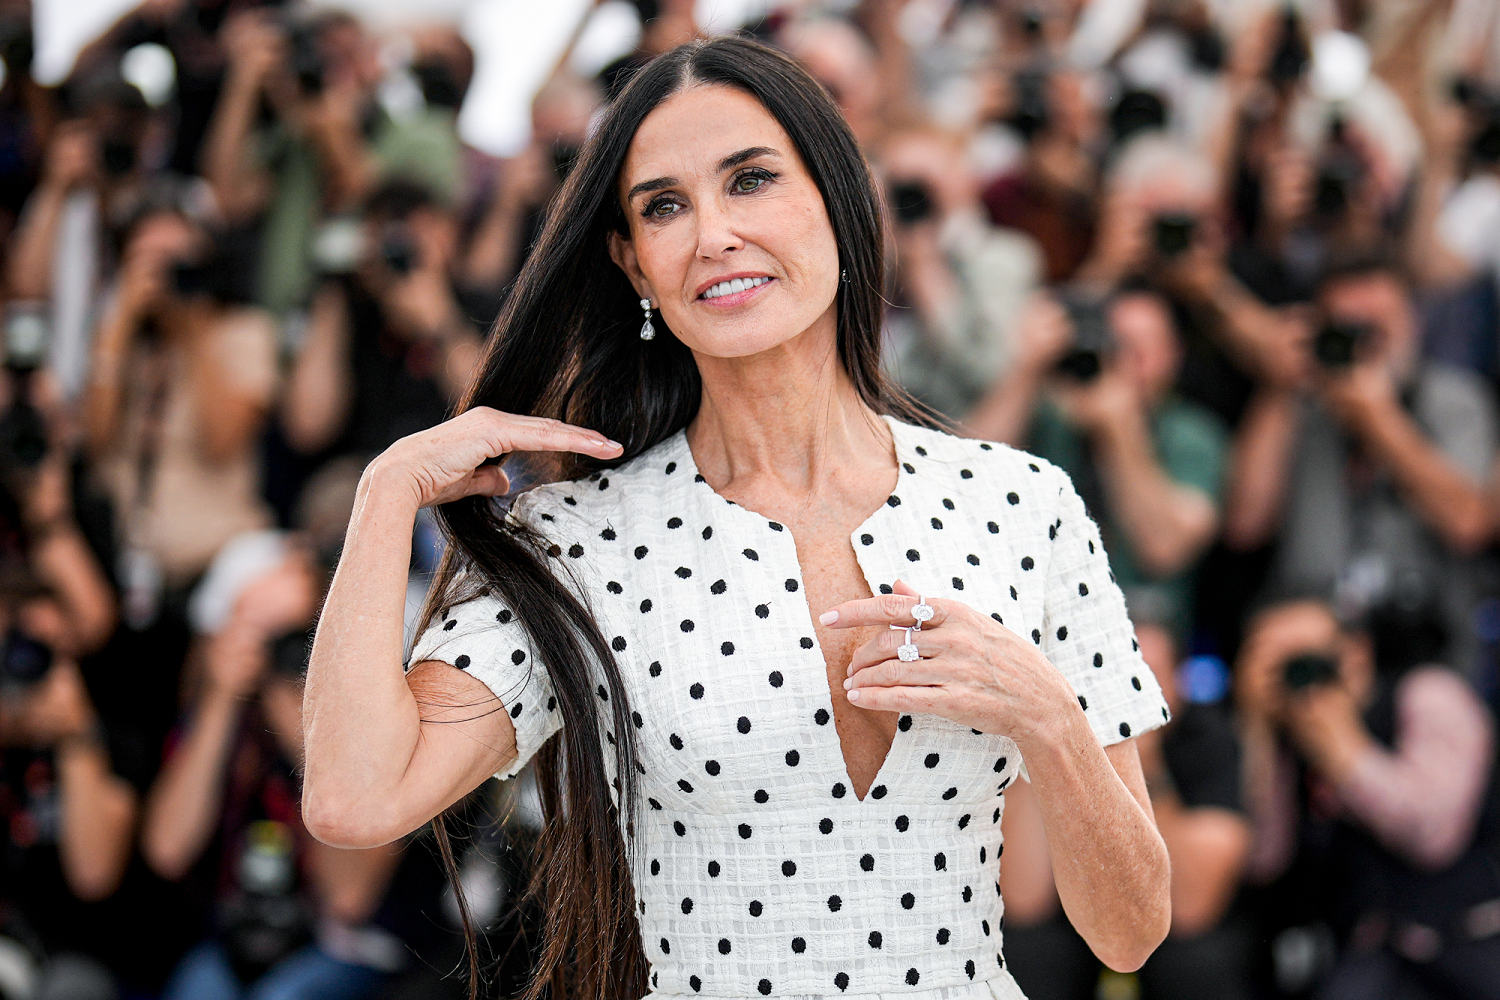 Demi Moore says full frontal nudity with Margaret Qualley in ‘The Substance’ required 'vulnerability'